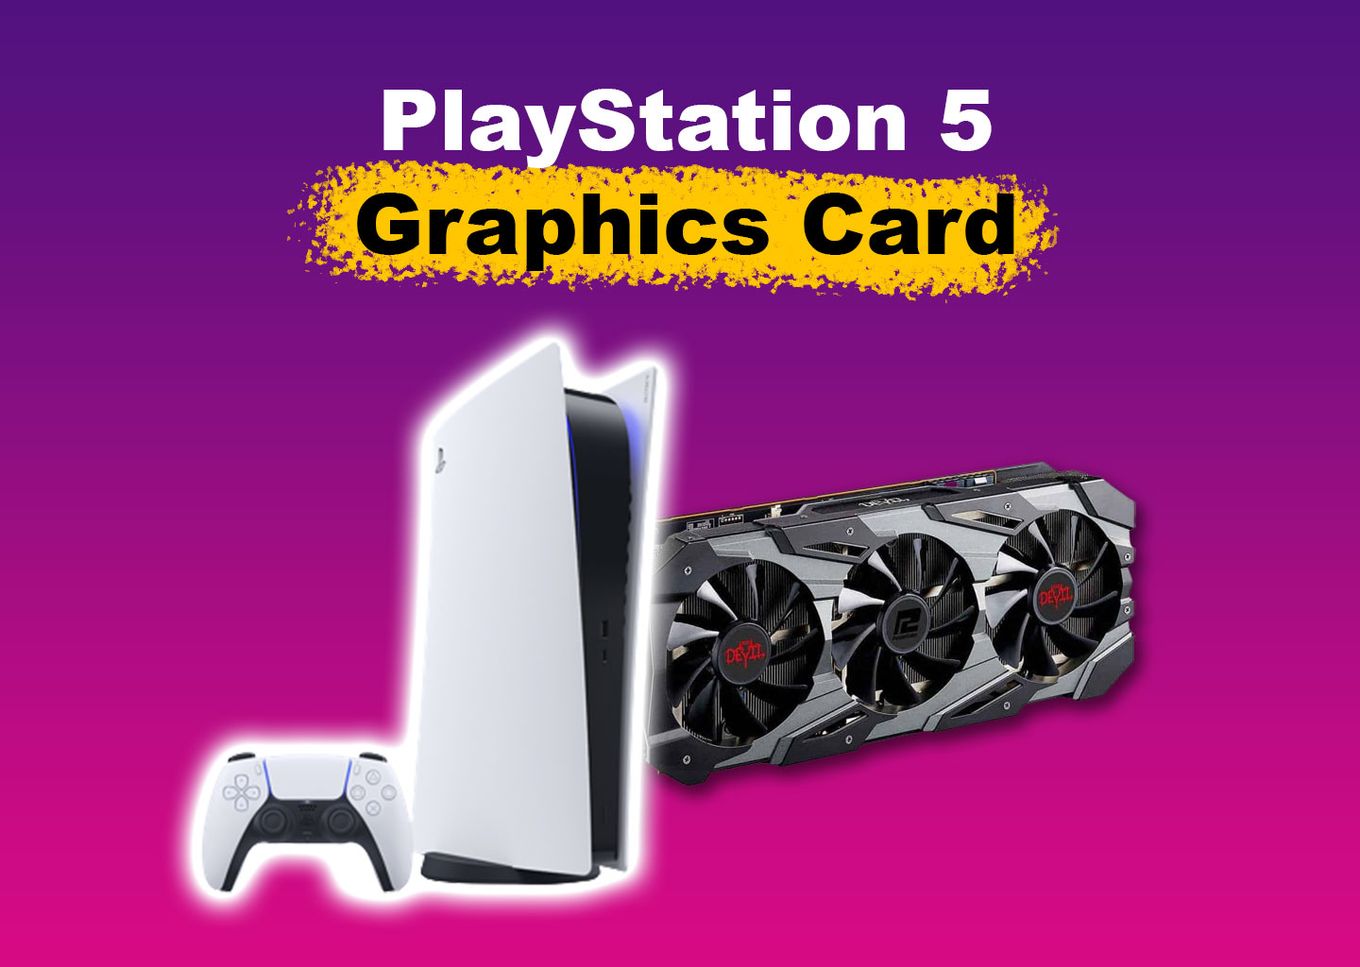 Playstation 5 Graphics Card Specs